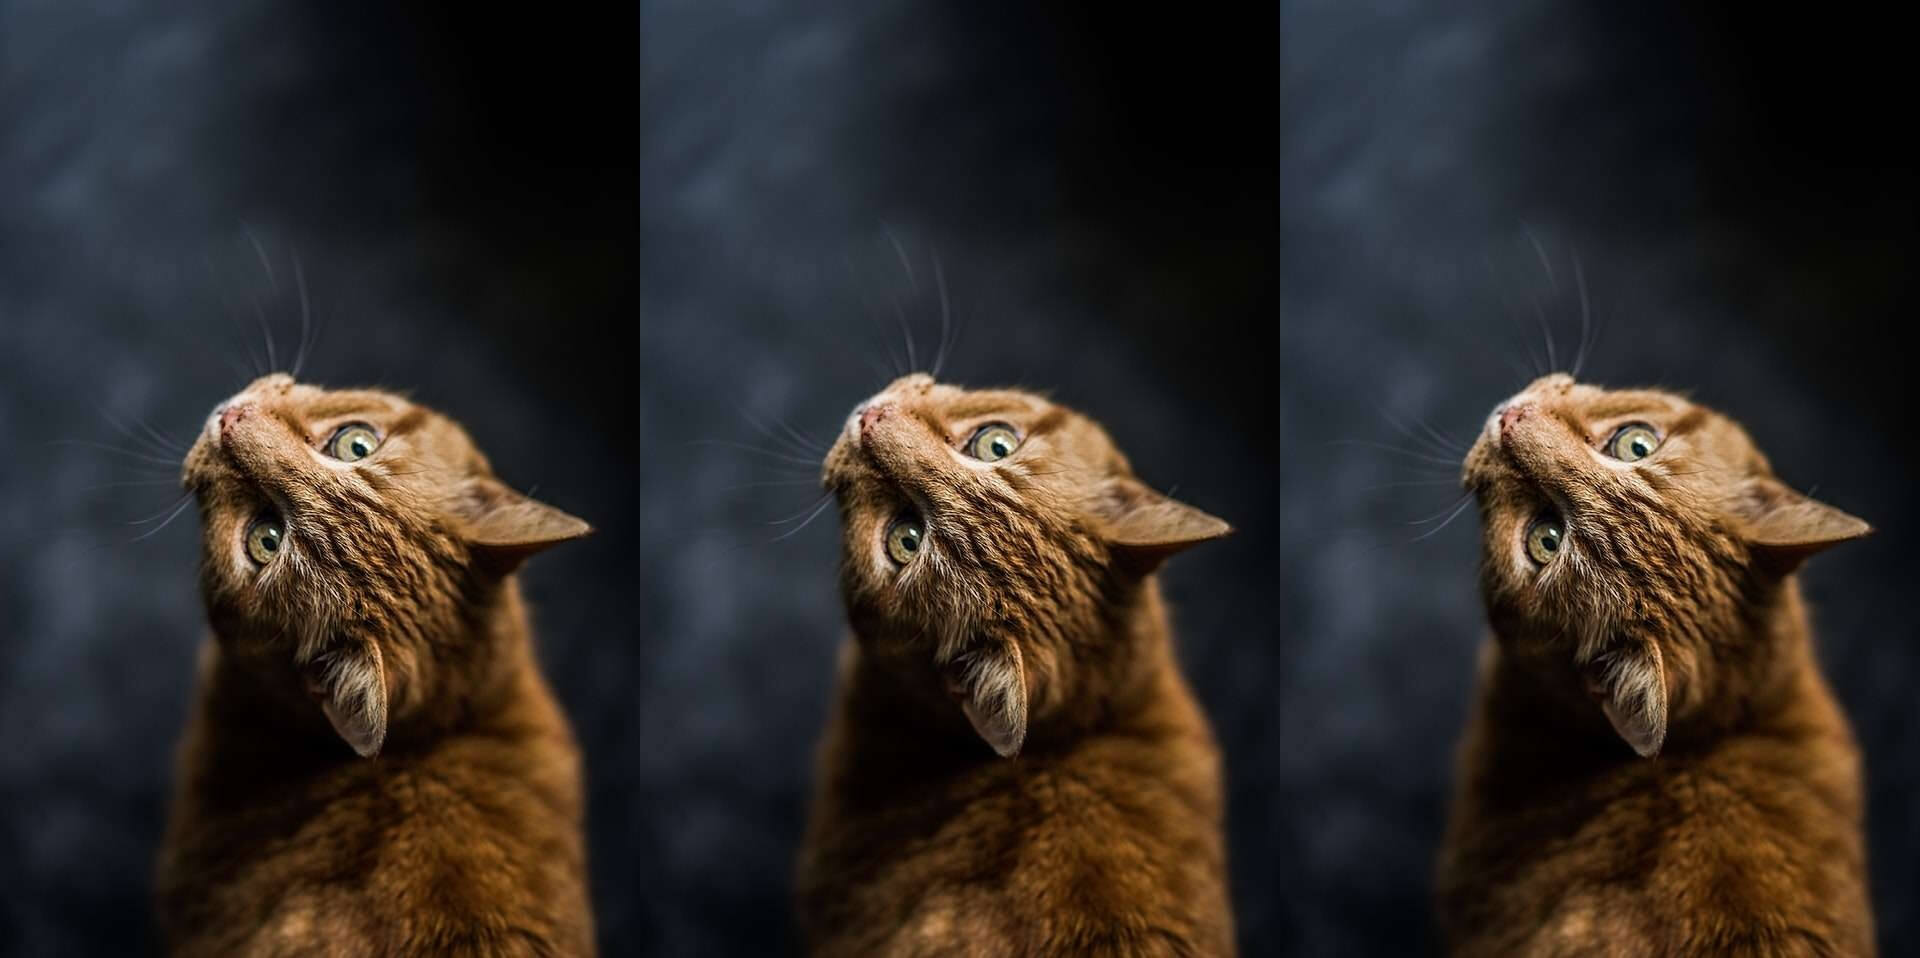 In this example, we horizontally duplicate a JPEG image of a ginger cat three times. The width of the image is tripled, resulting in a width of 1920 pixels. (Source: Pexels.)